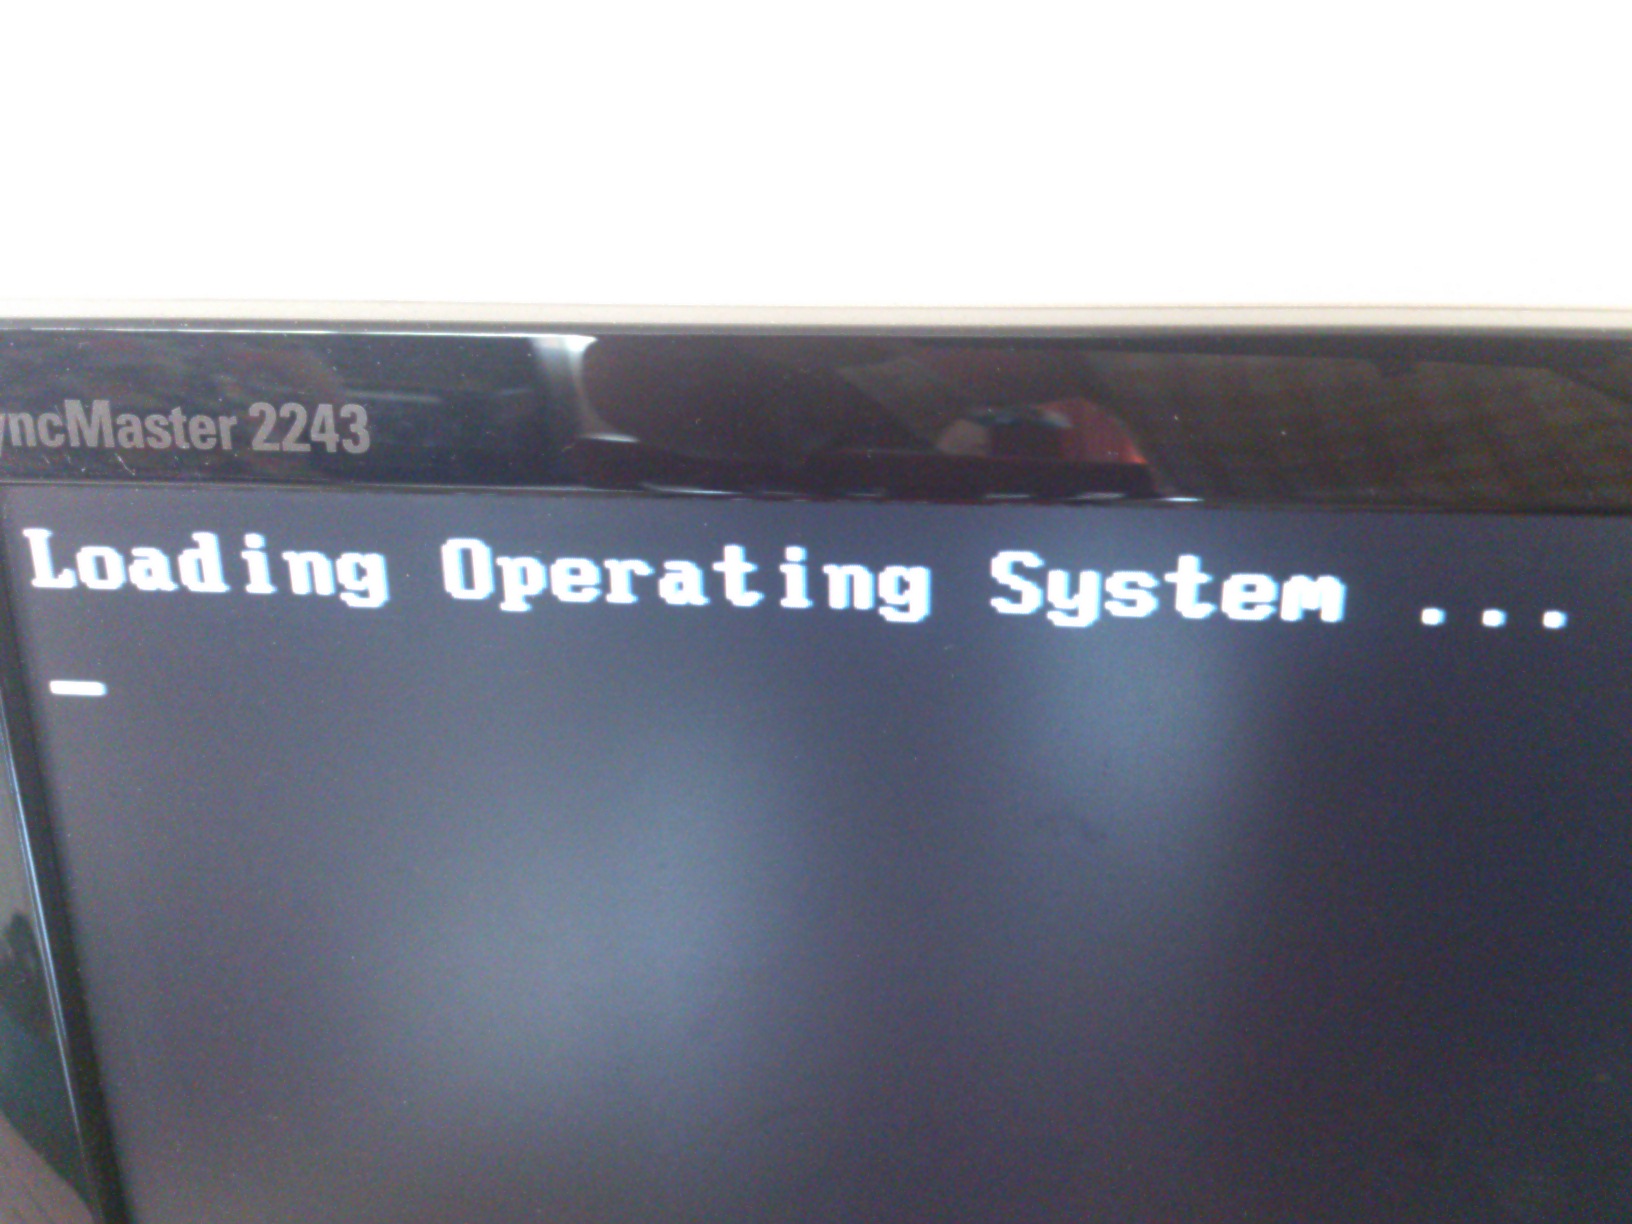 Error loading operating. Disk Boot failure Insert System Disk and Press enter.